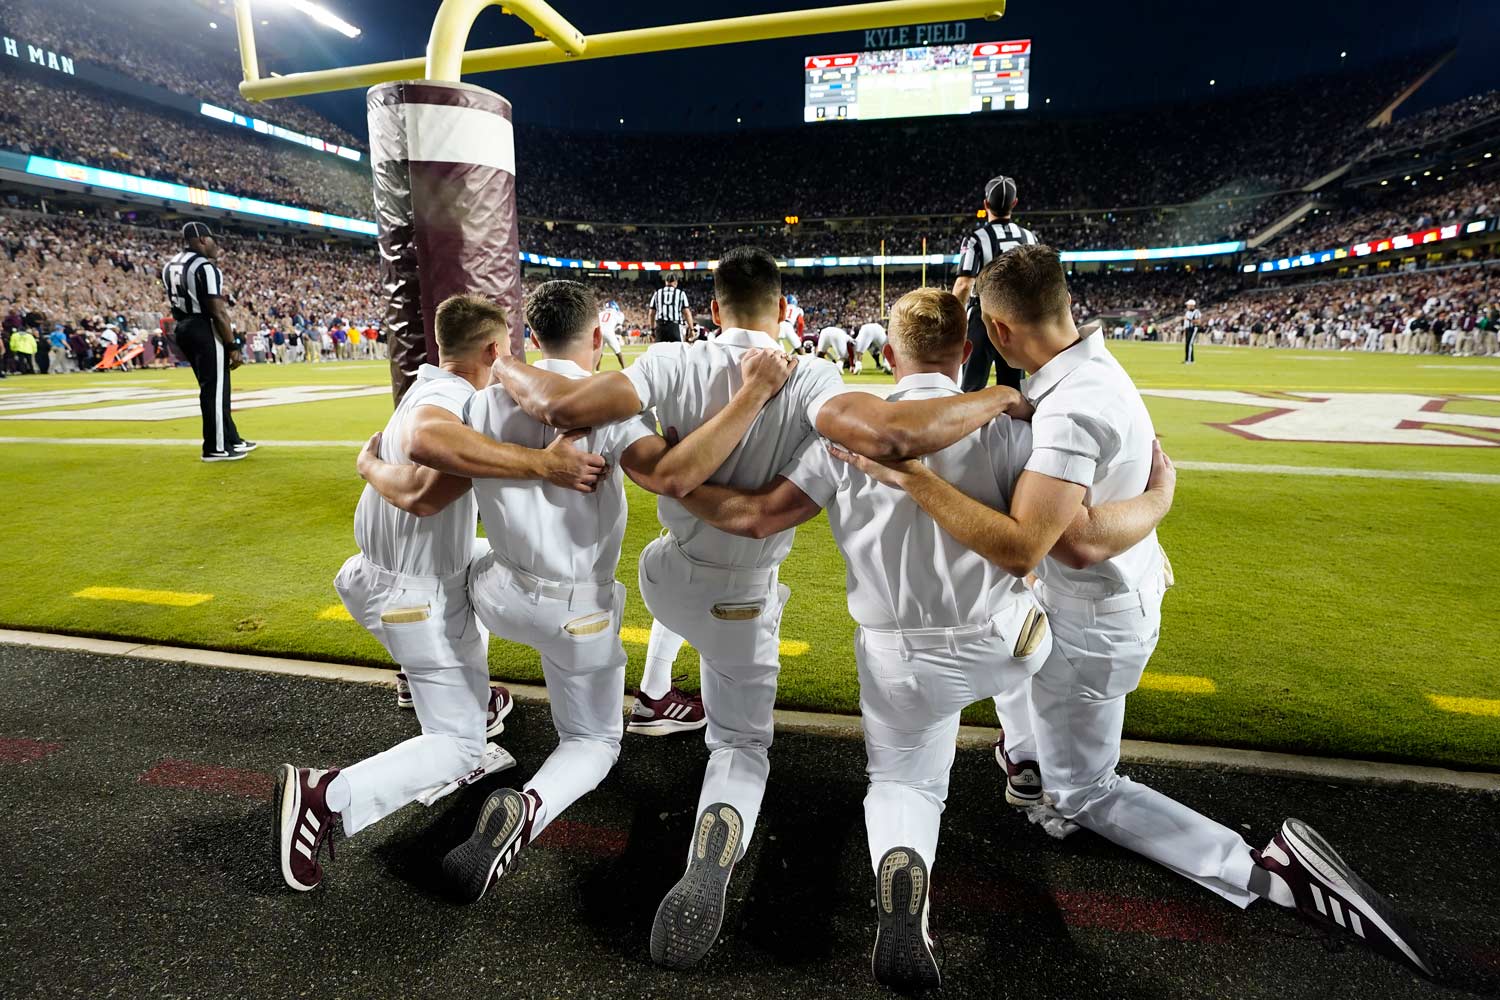 The Texas A&M Yell leaders prep for kickoff in the endzone of Kyle Field